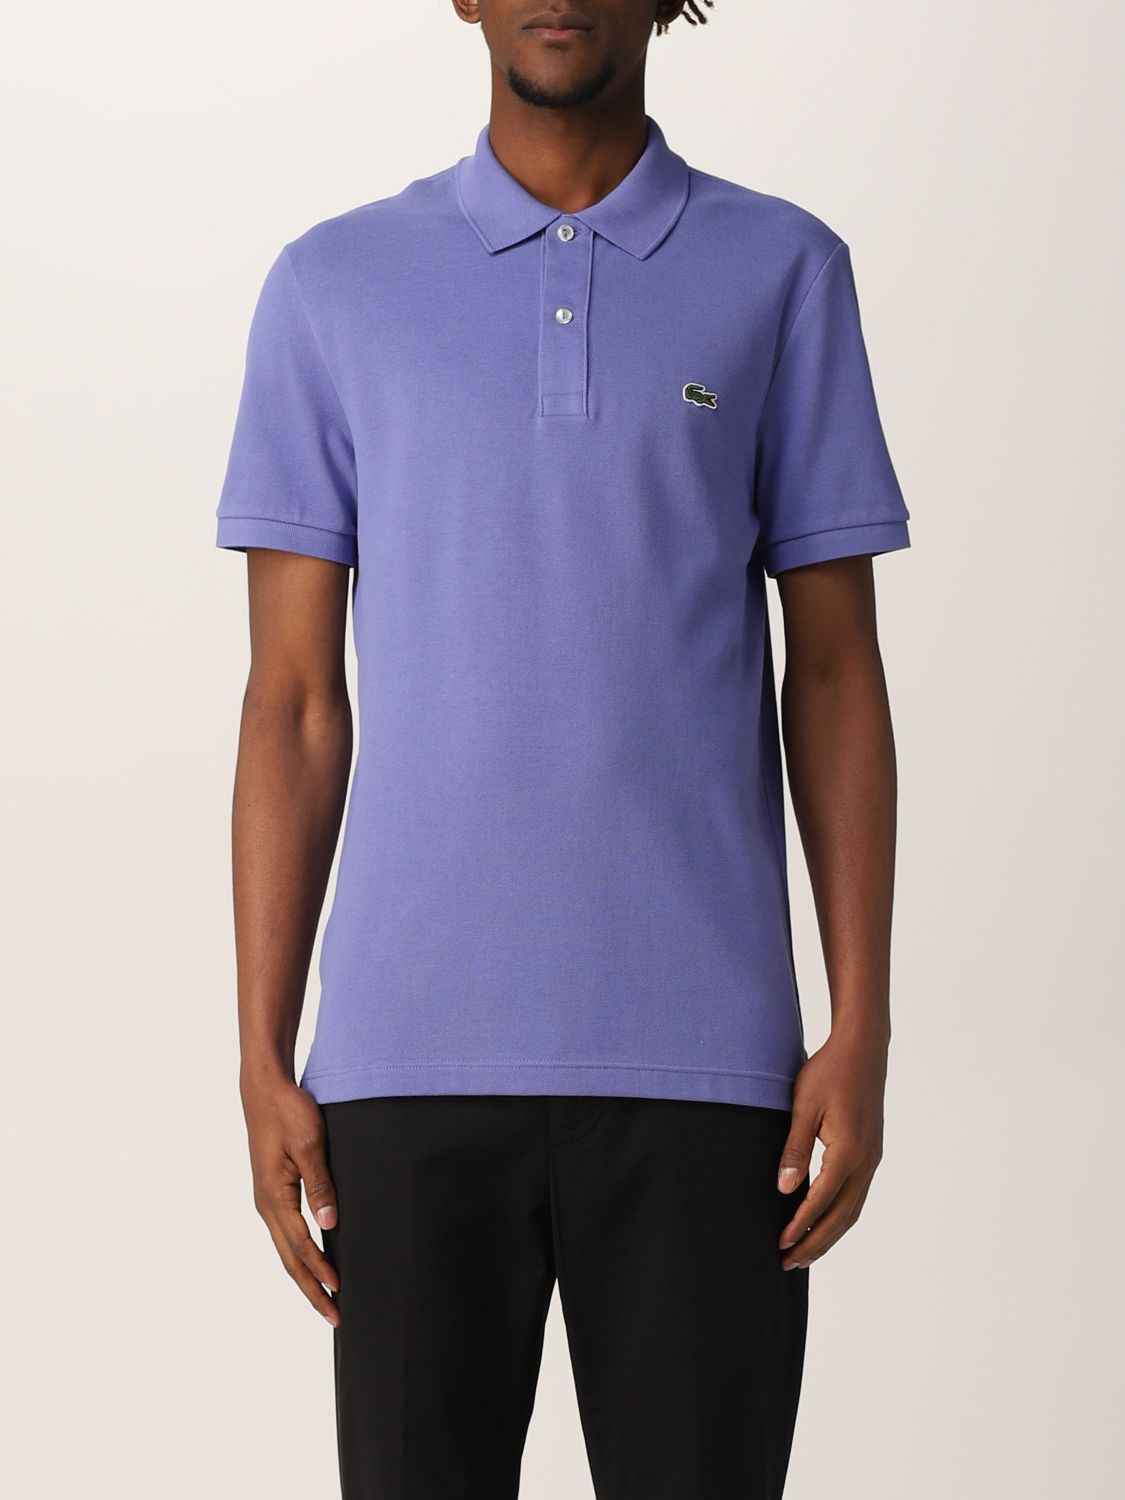 Lacoste Outlet: basic polo shirt with logo - Violet | Lacoste polo shirt PH4012 online on